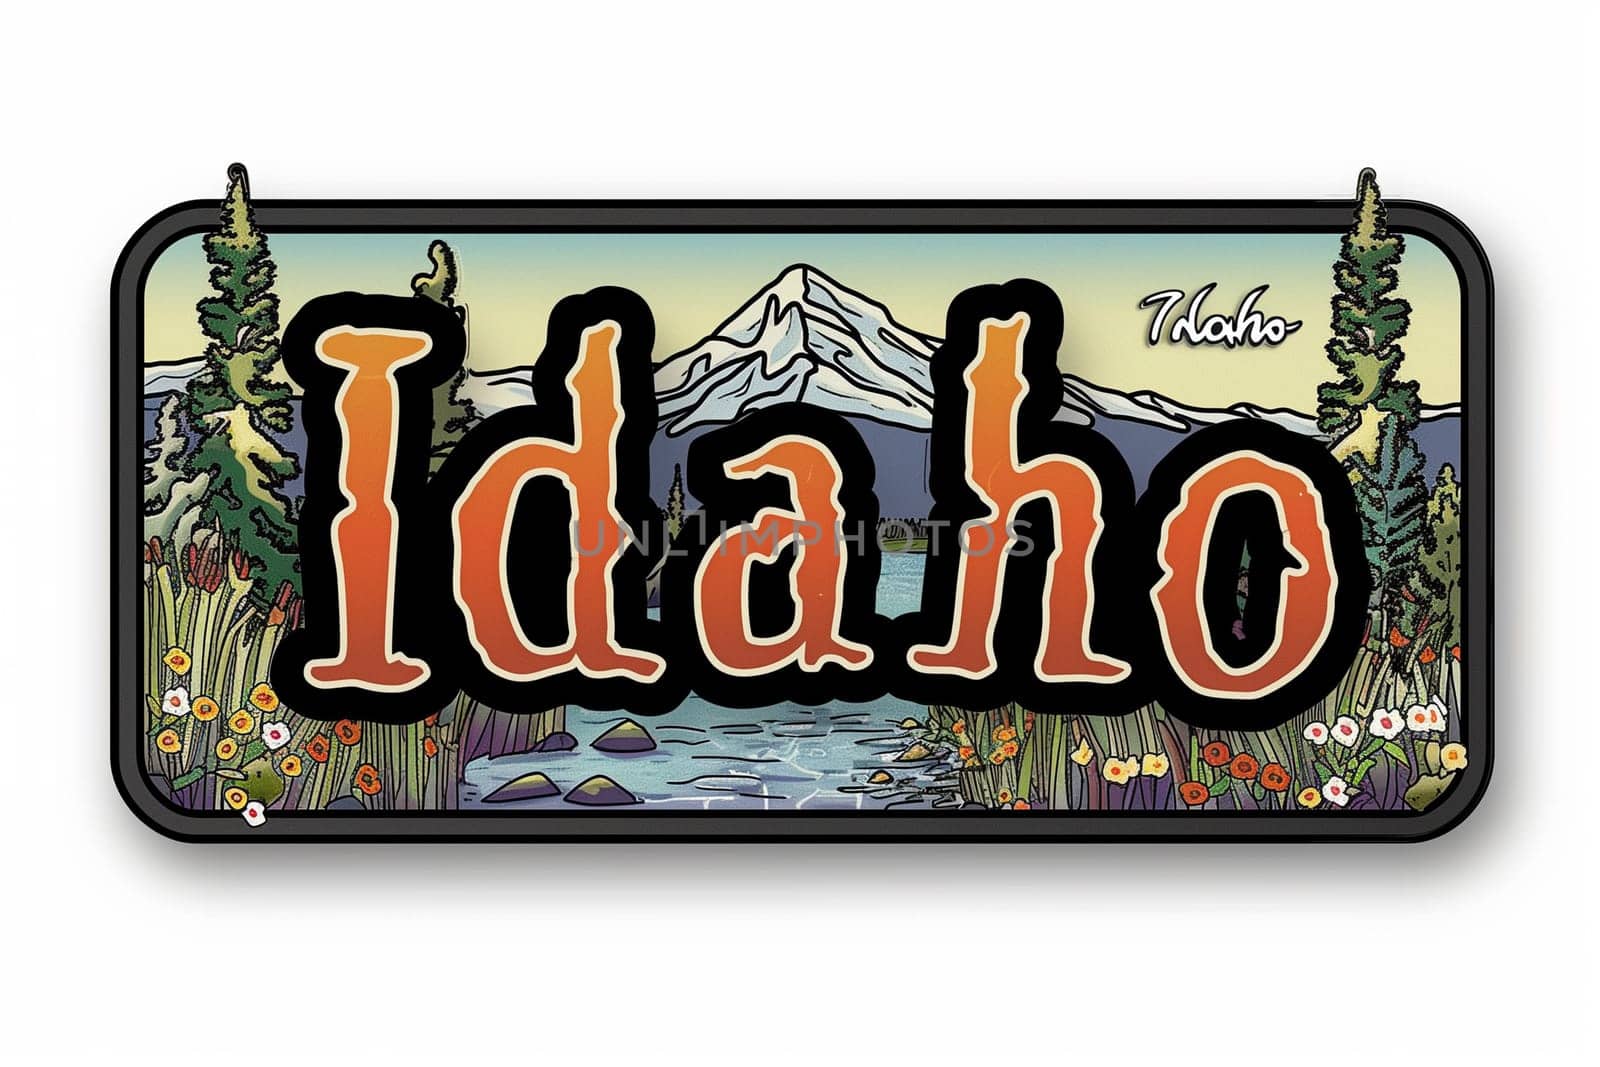 Idaho Sign With Mountain Background by Sd28DimoN_1976